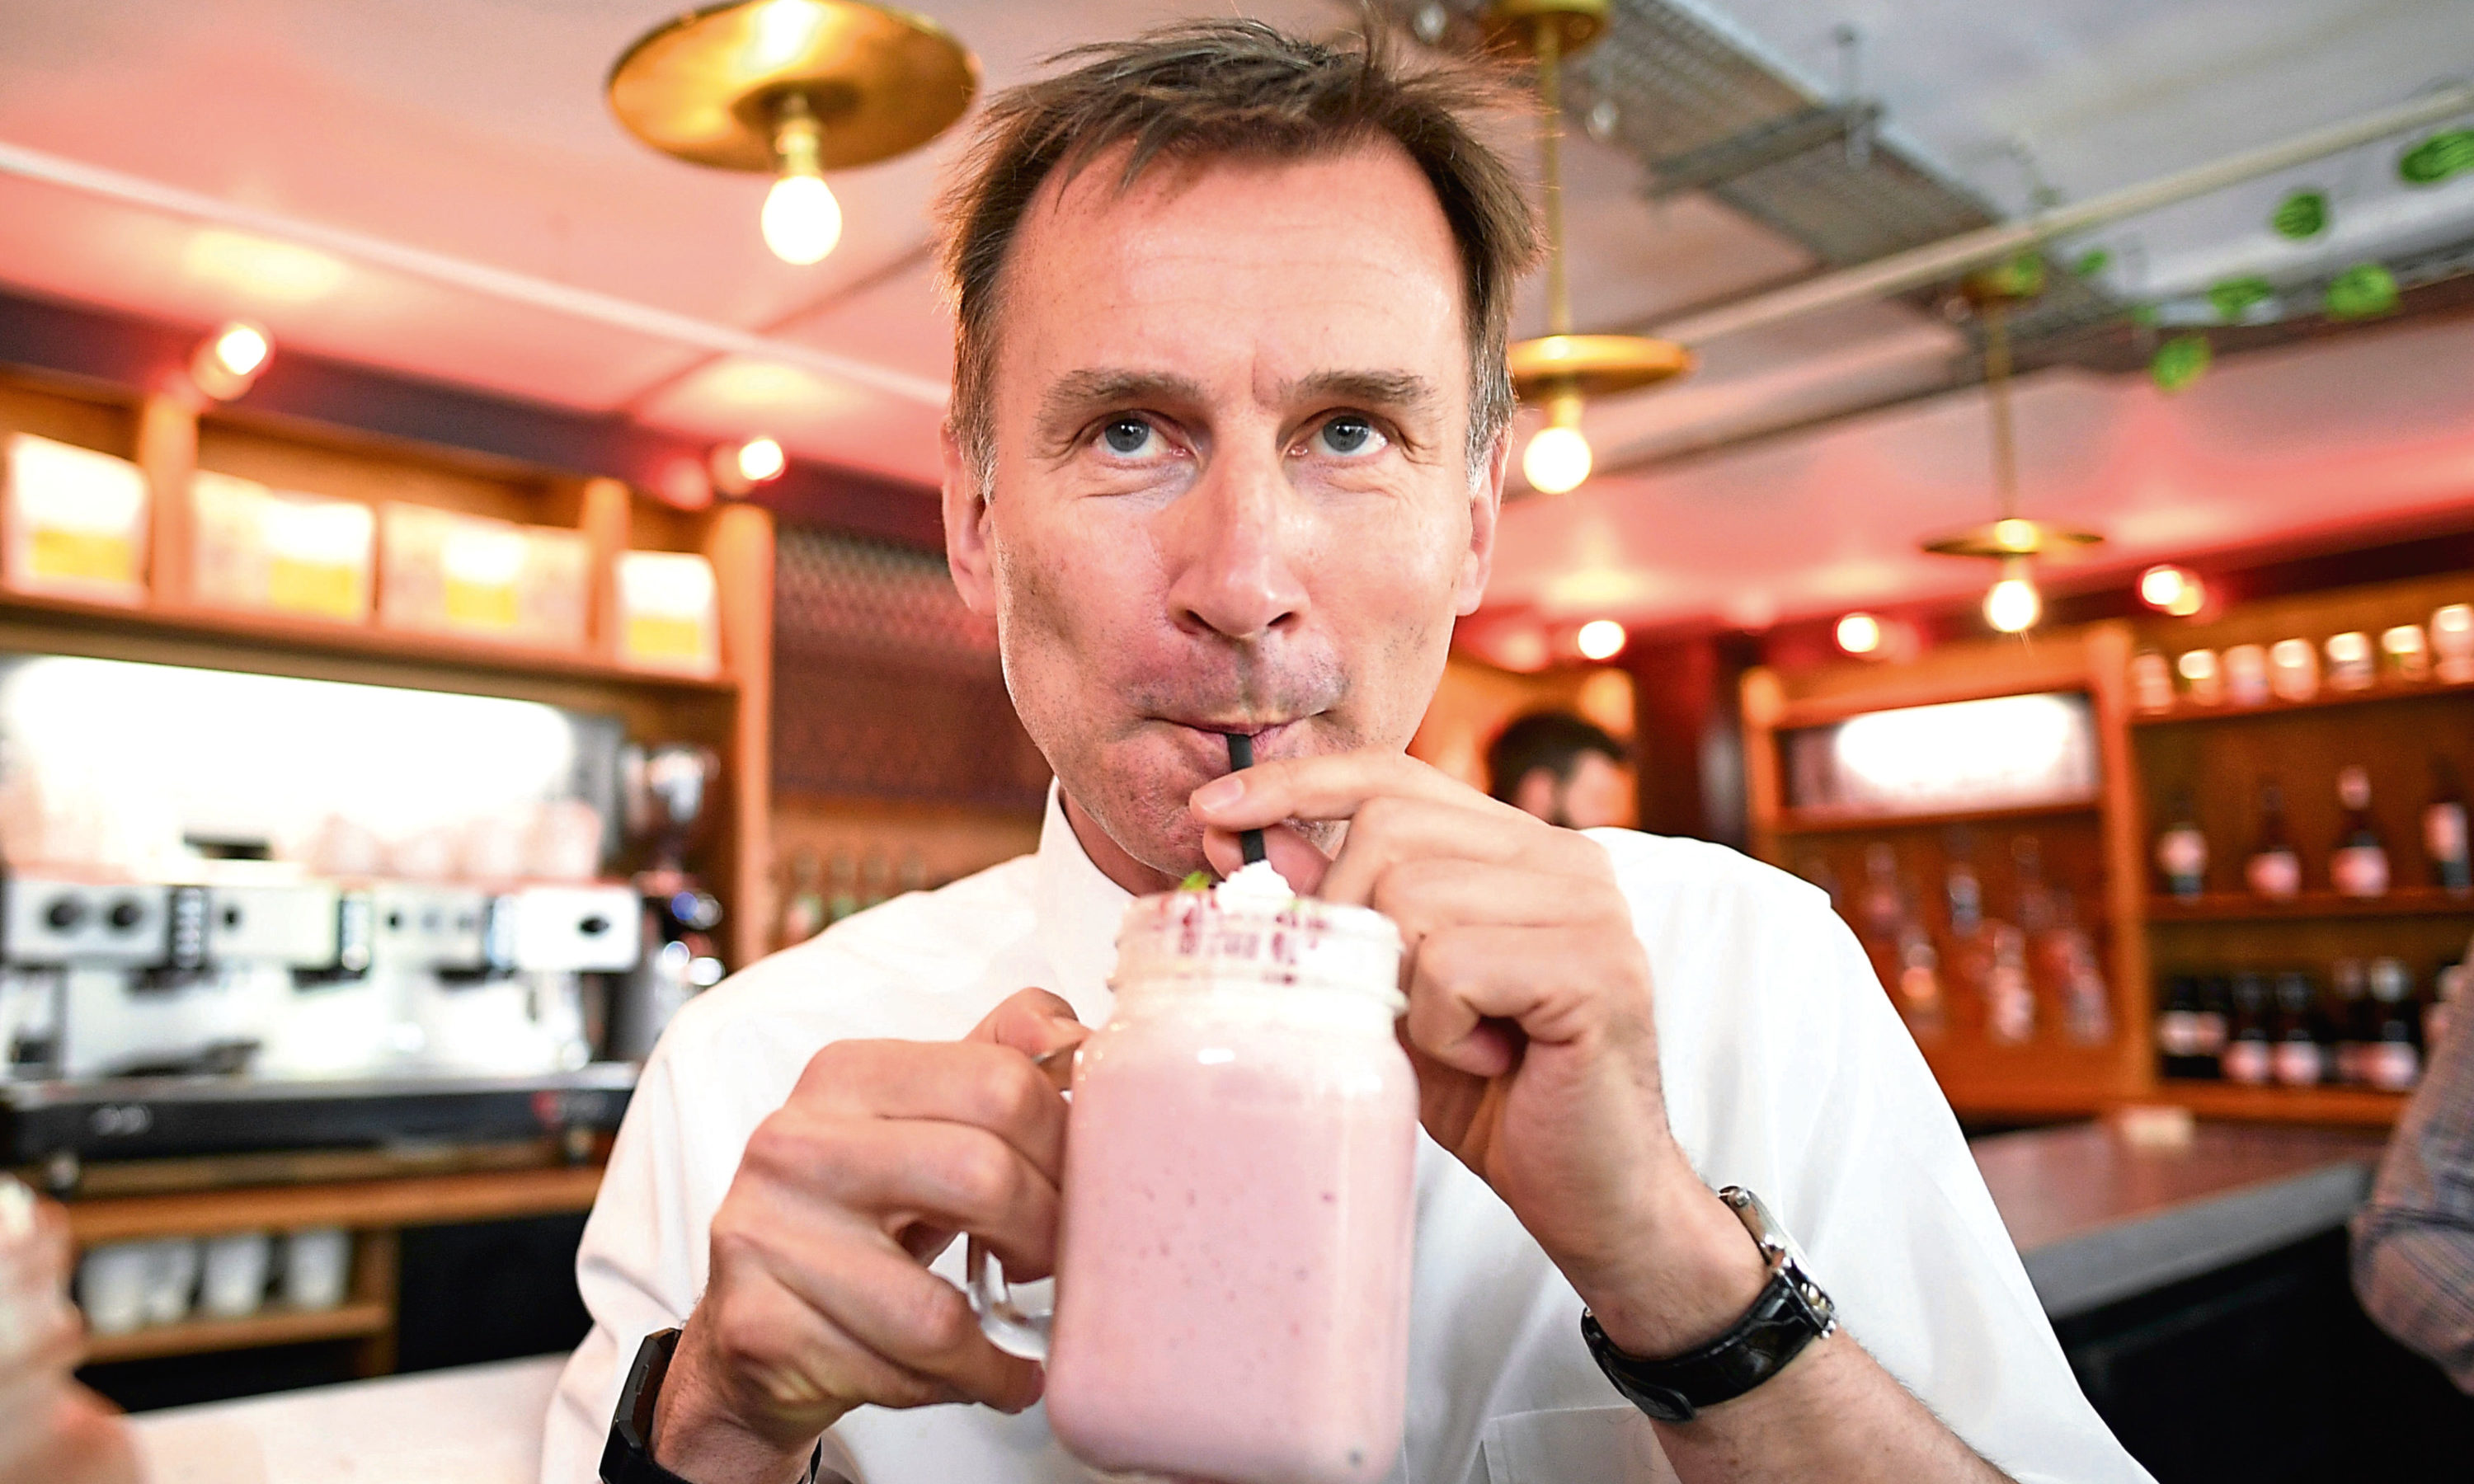 Conservative party leadership candidate Jeremy Hunt sips a shake